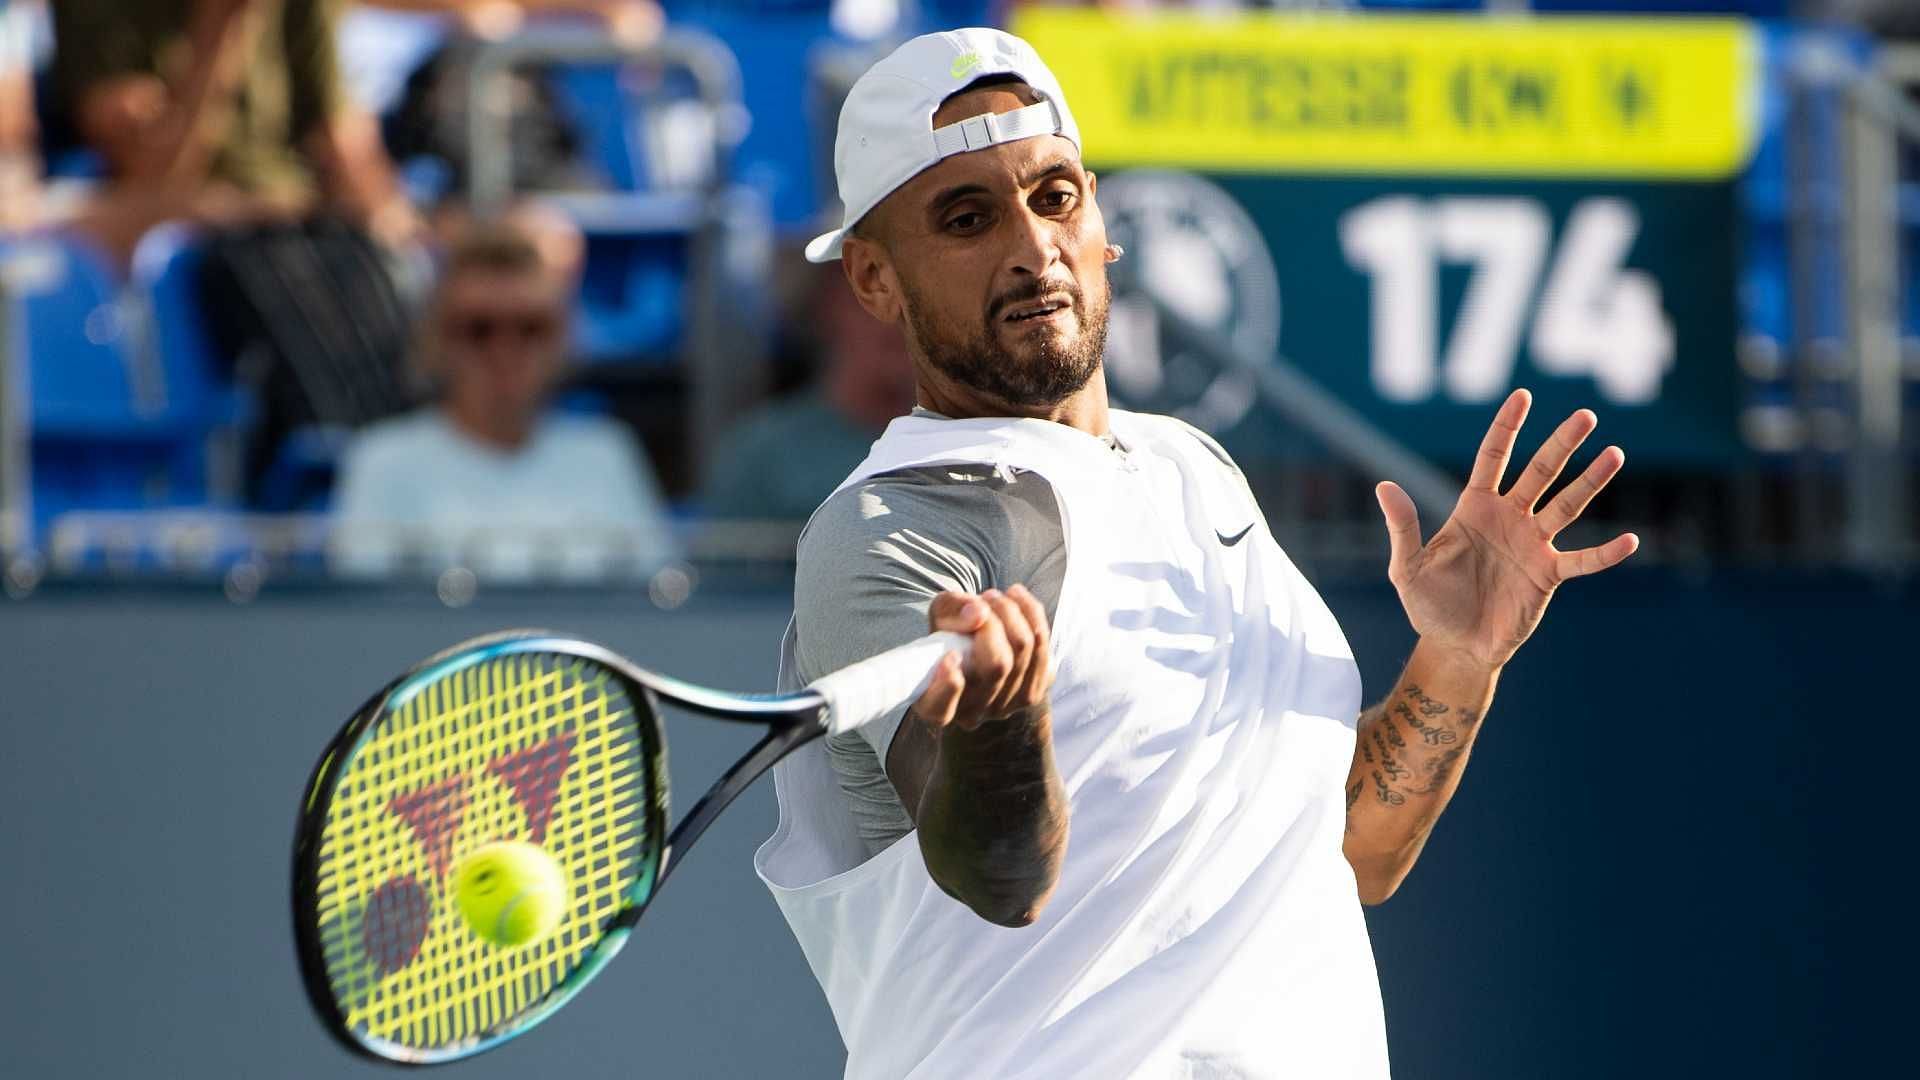 Nick Kyrgios&#039; explosive game was bit too one-dimensional at times